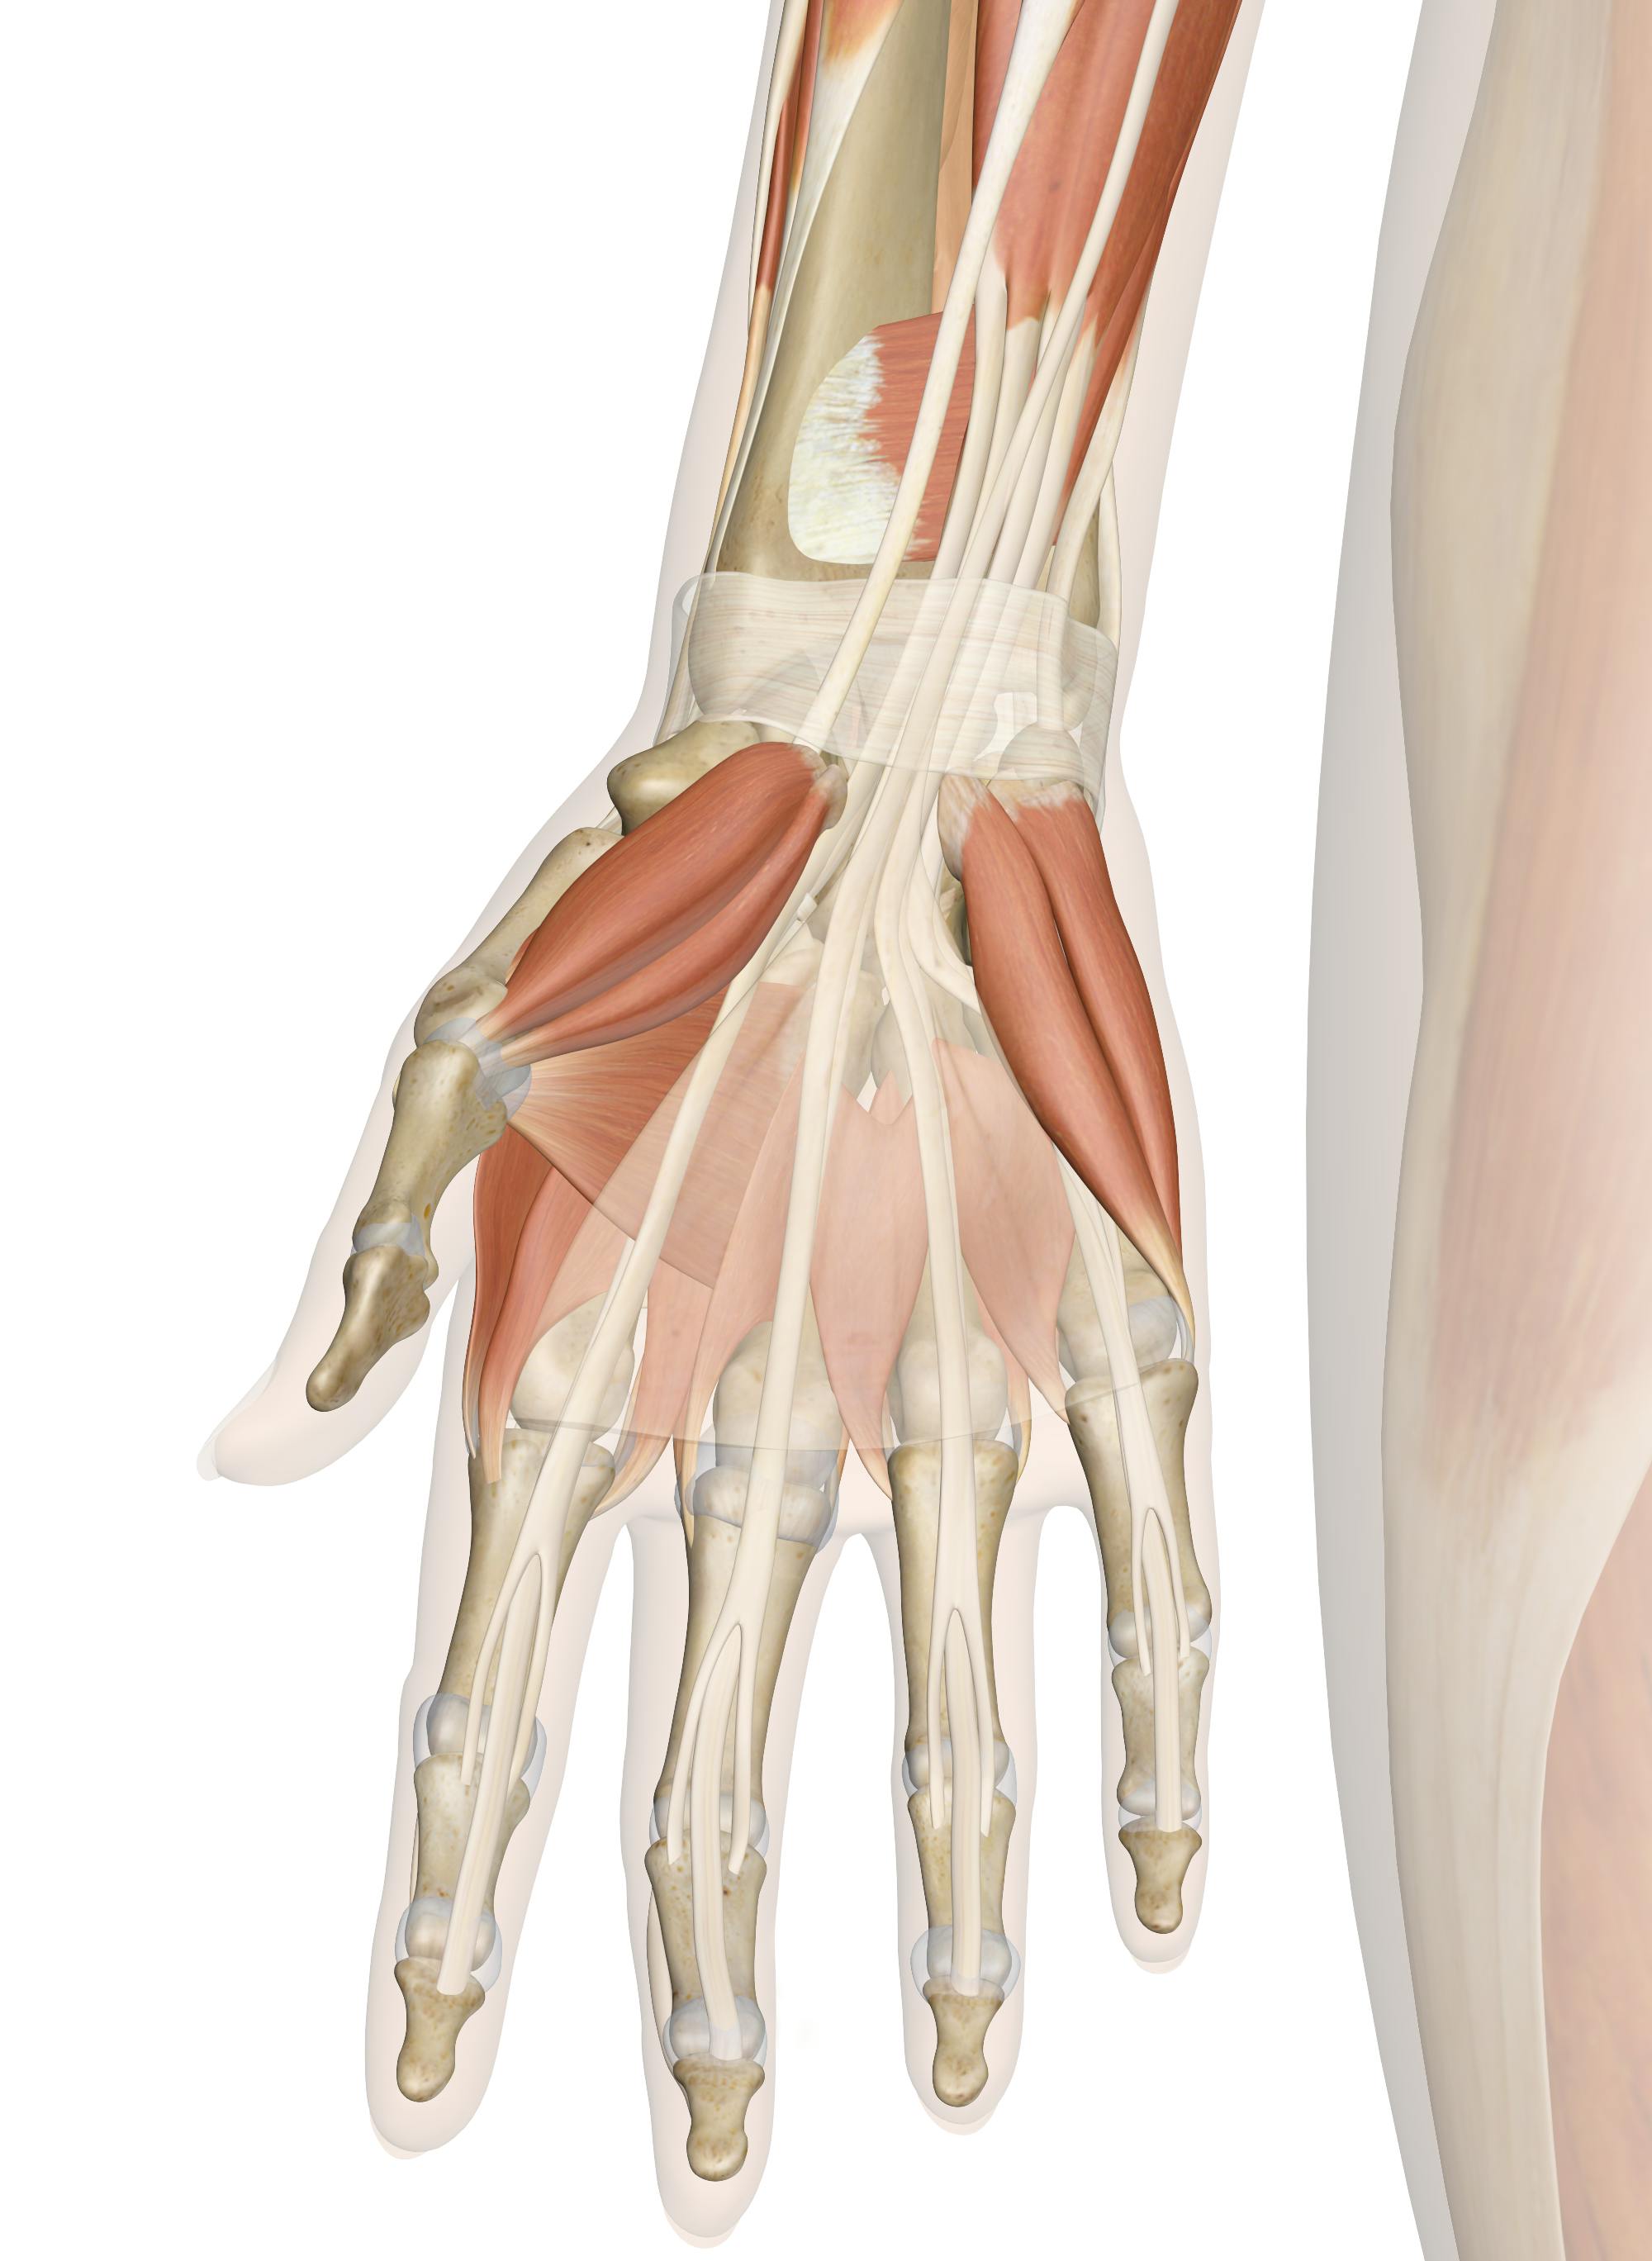 human hand muscles